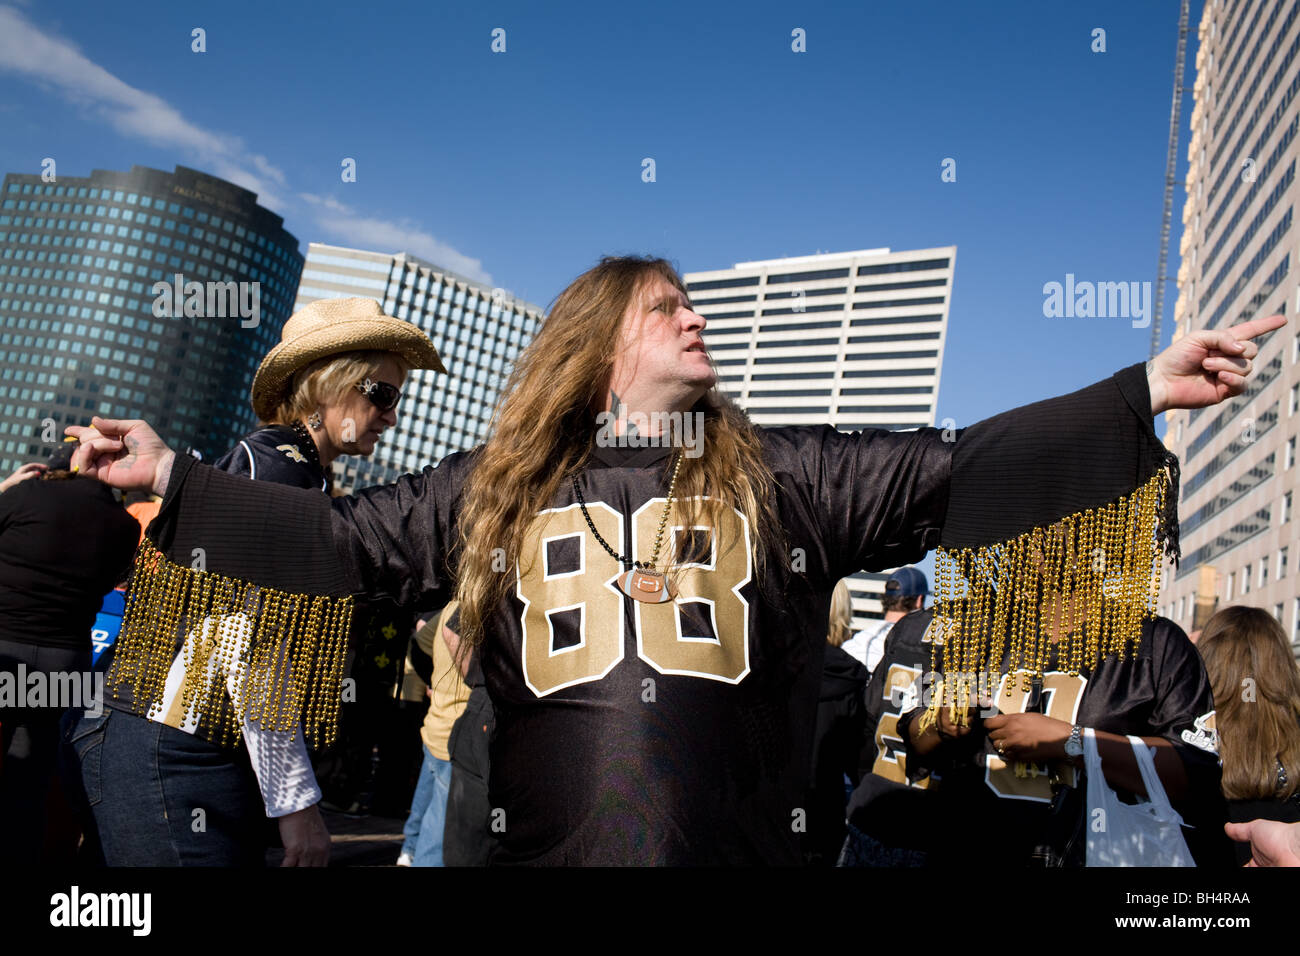 New Orleans Saints football fans tailgating before a playoff game Stock Photo